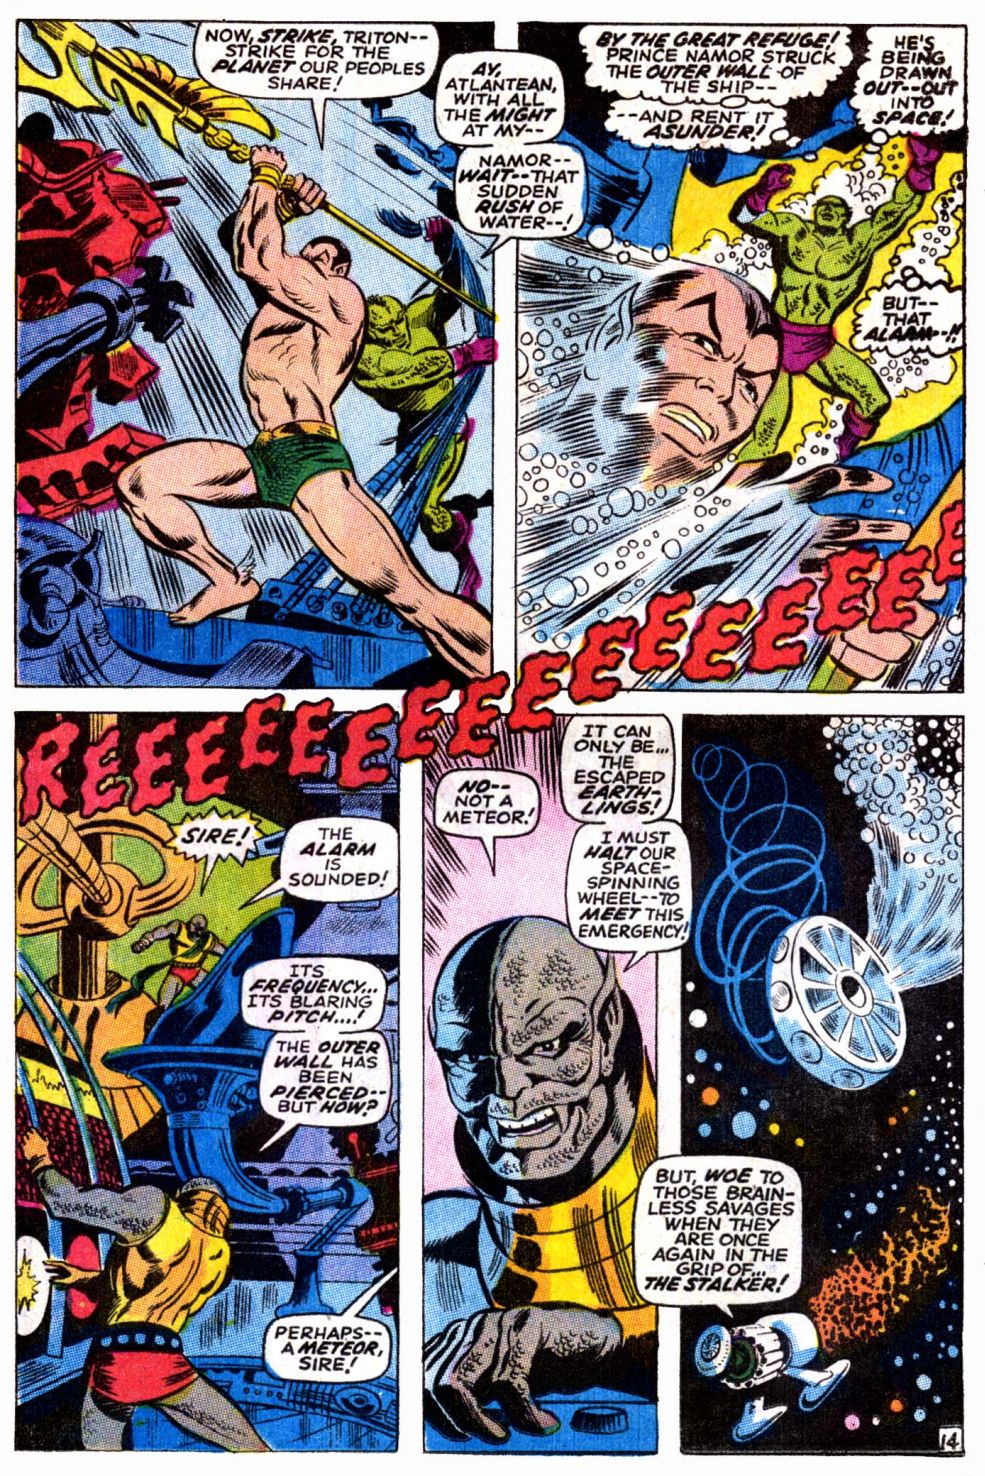 Read online The Sub-Mariner comic -  Issue #18 - 20